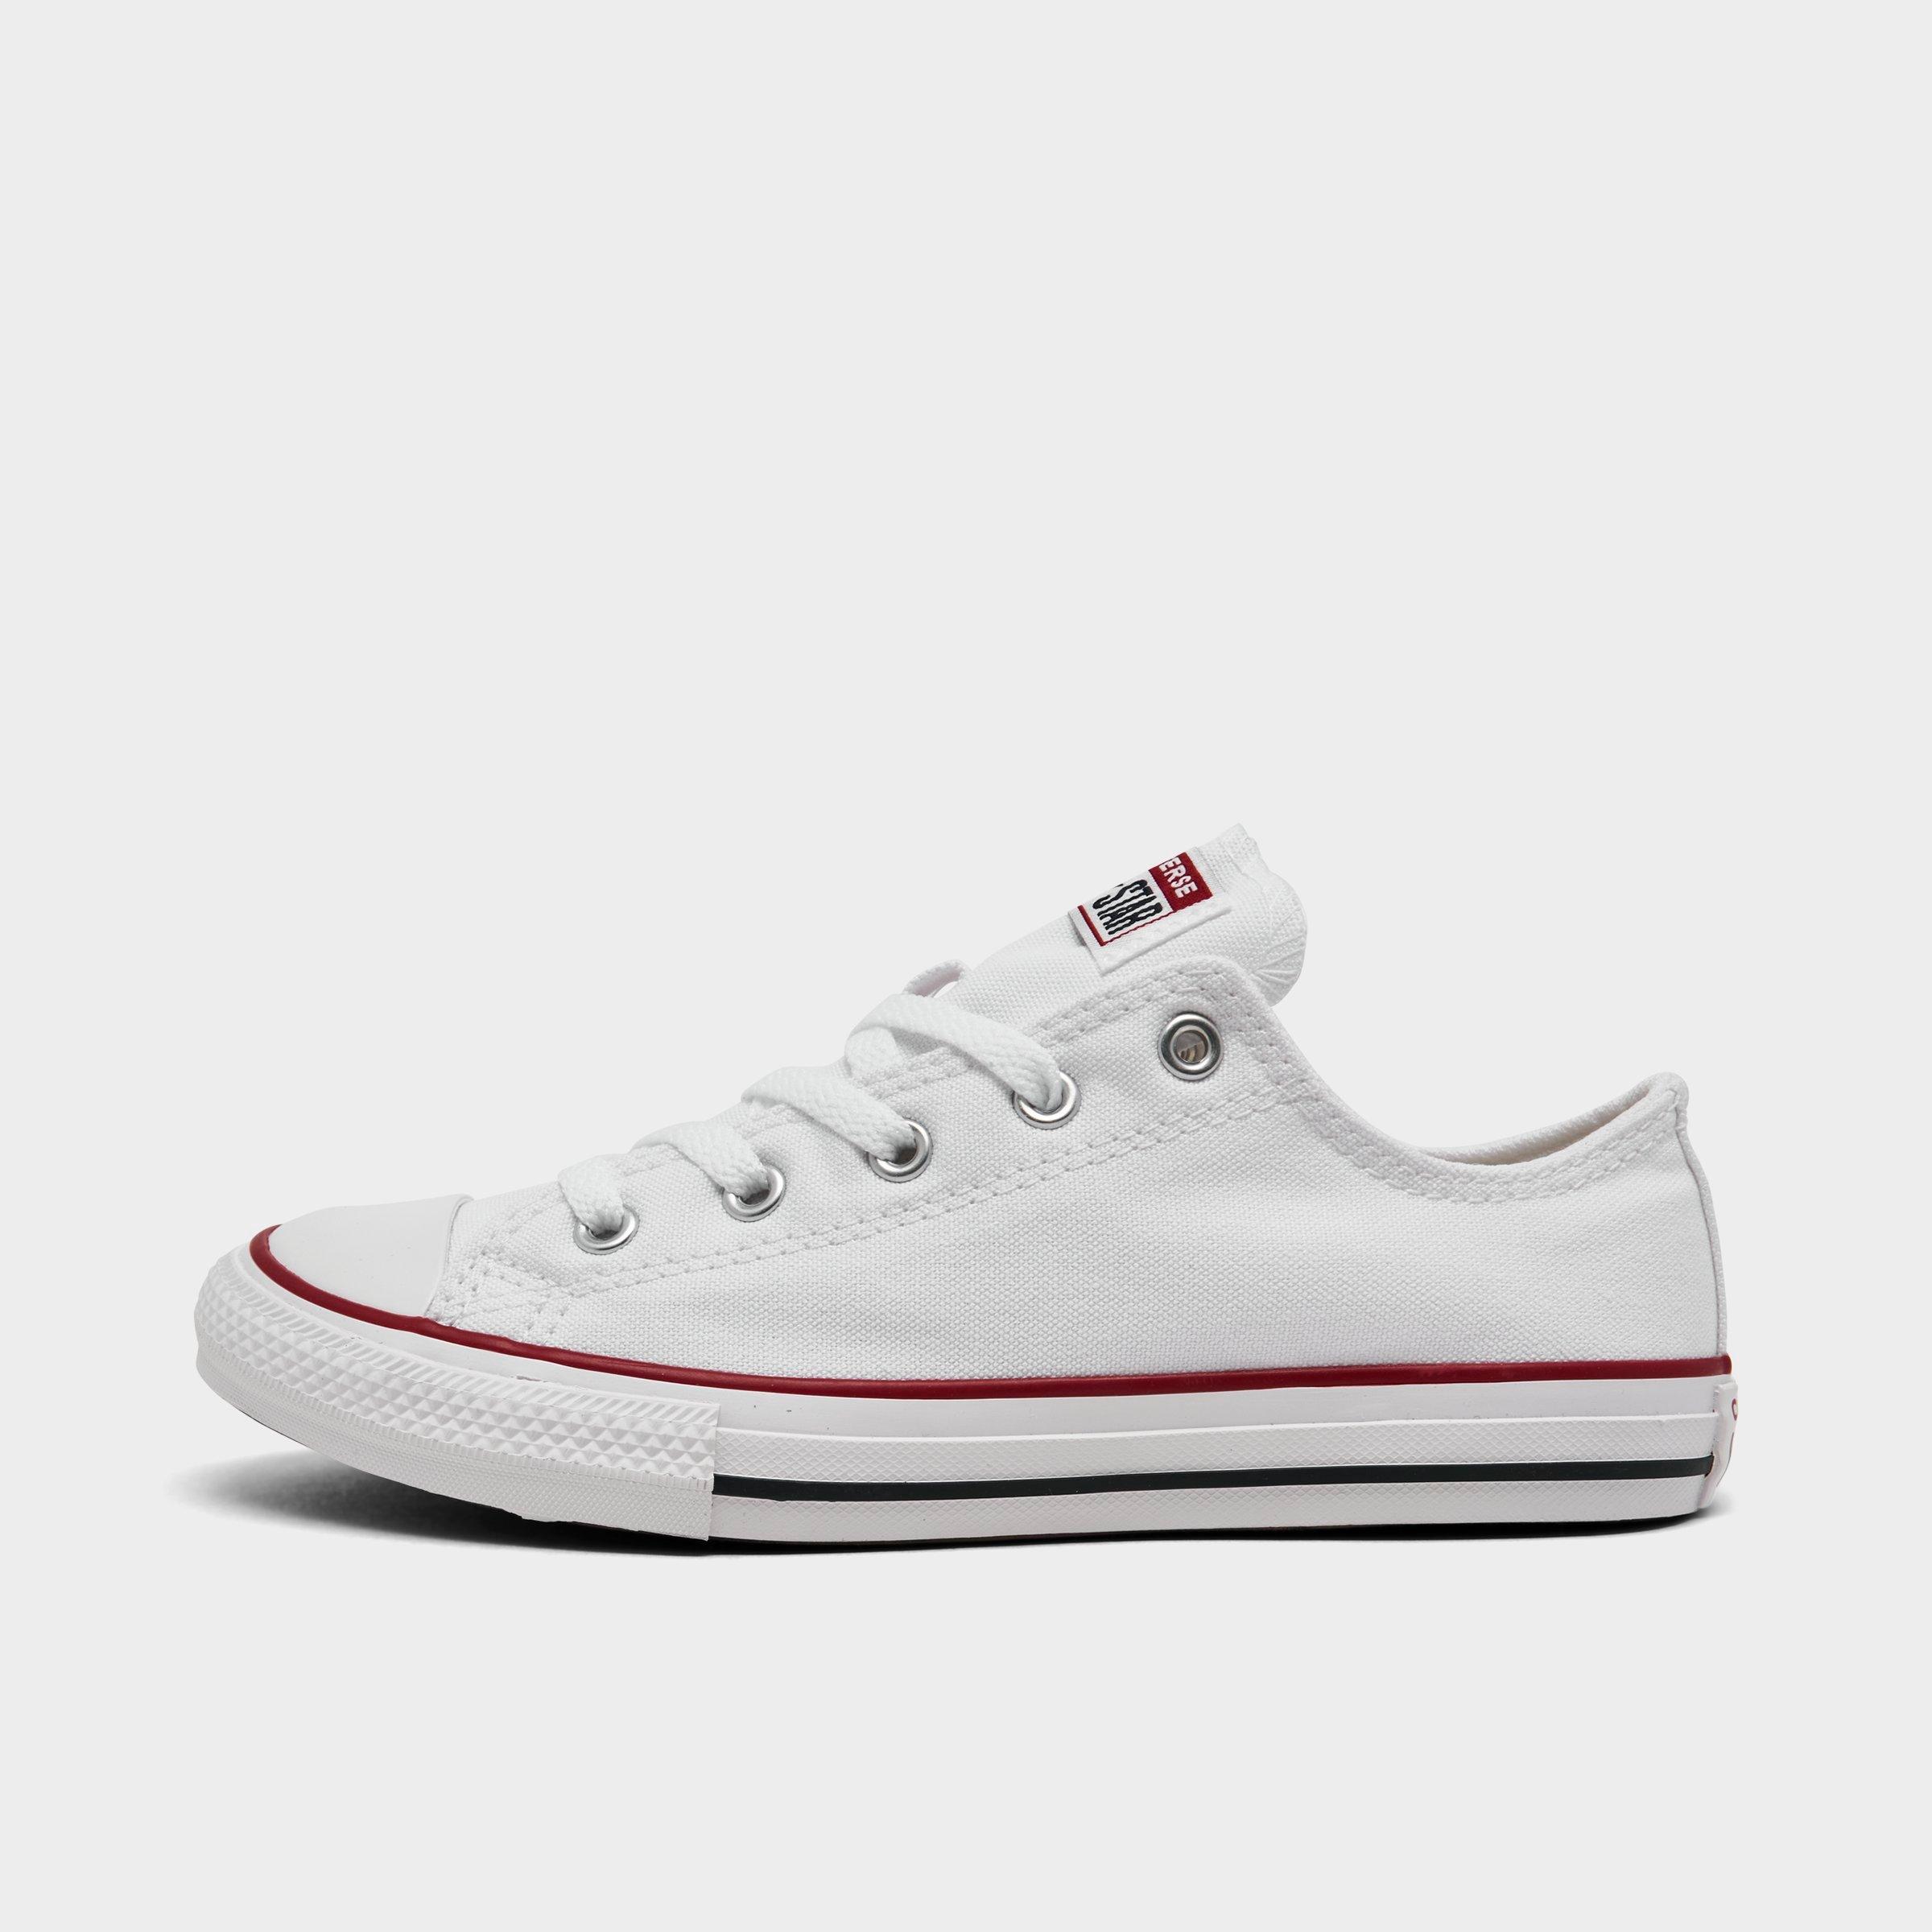 places that sell converse near me